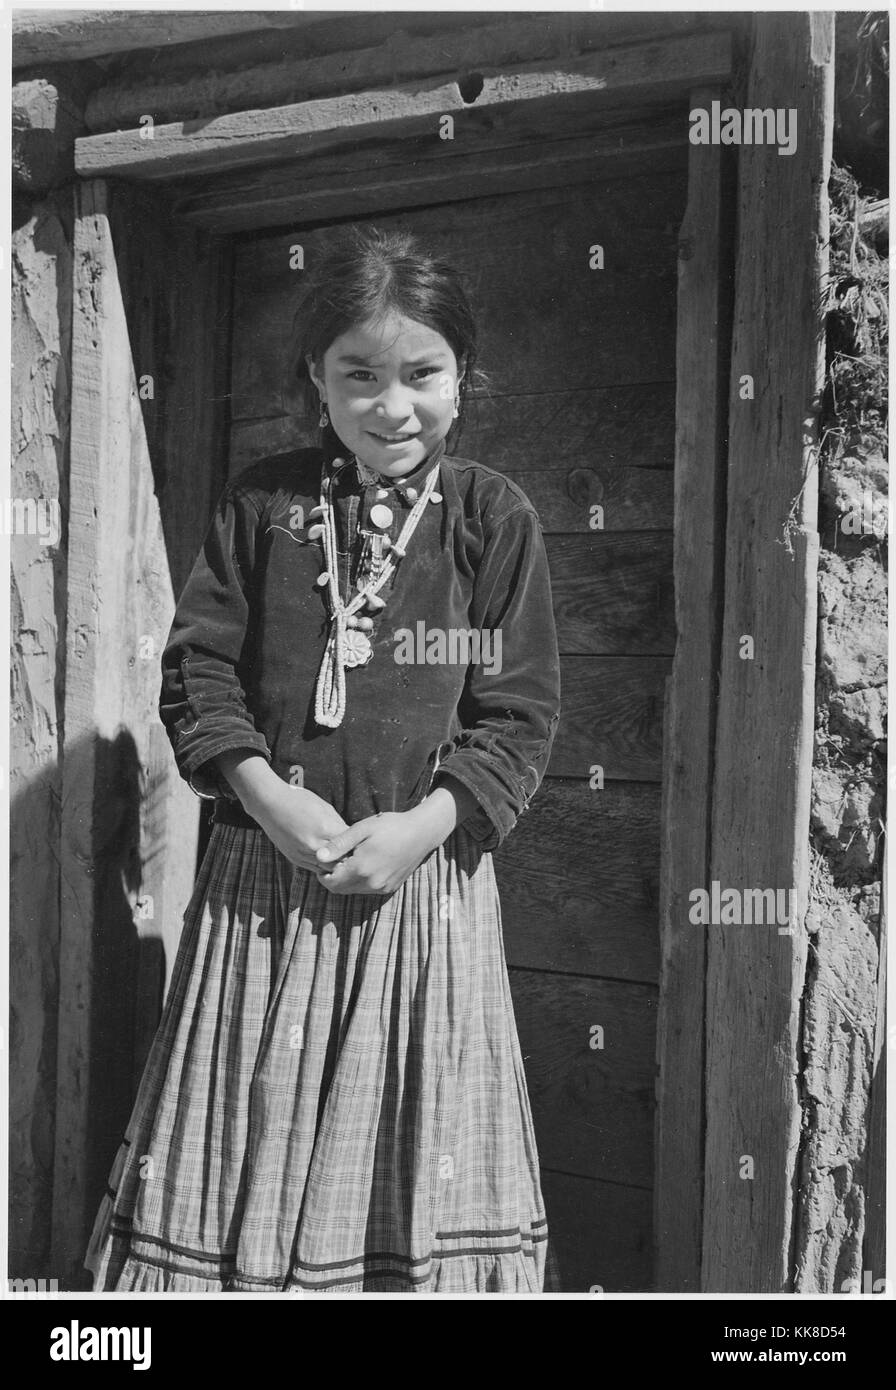 Black and white photograph of a young Native American girl standingg in front of a doorway, captioned 'Navajo Girl, Canyon de Chelle, Arizona', by Ansel Adams, from Photographs of National Parks and Monuments, Canyon de Chelly National Monument, Arizona, United States, 1941. Stock Photo